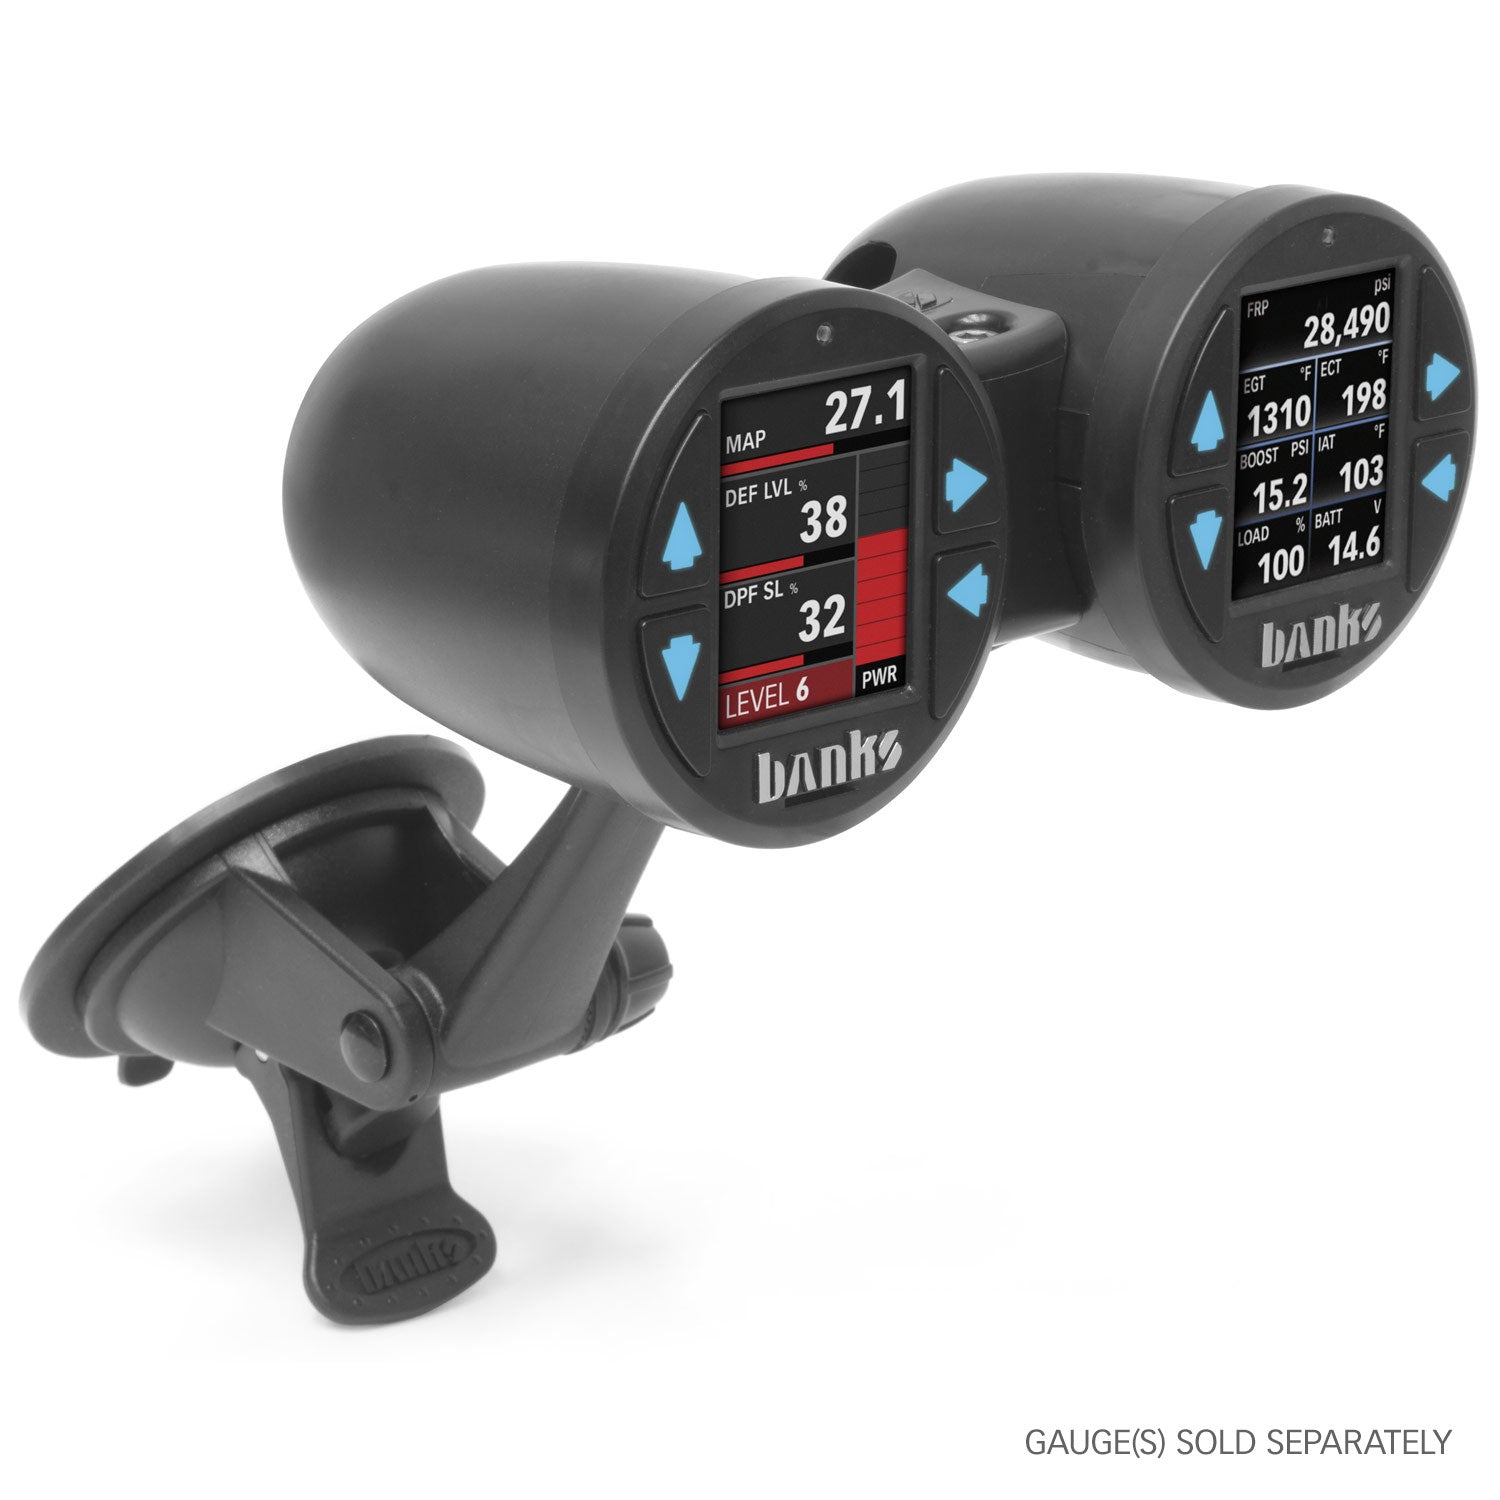 Alternate view of two iDash 1.8 gauges installed in the Banks dual gauge pod suction mount